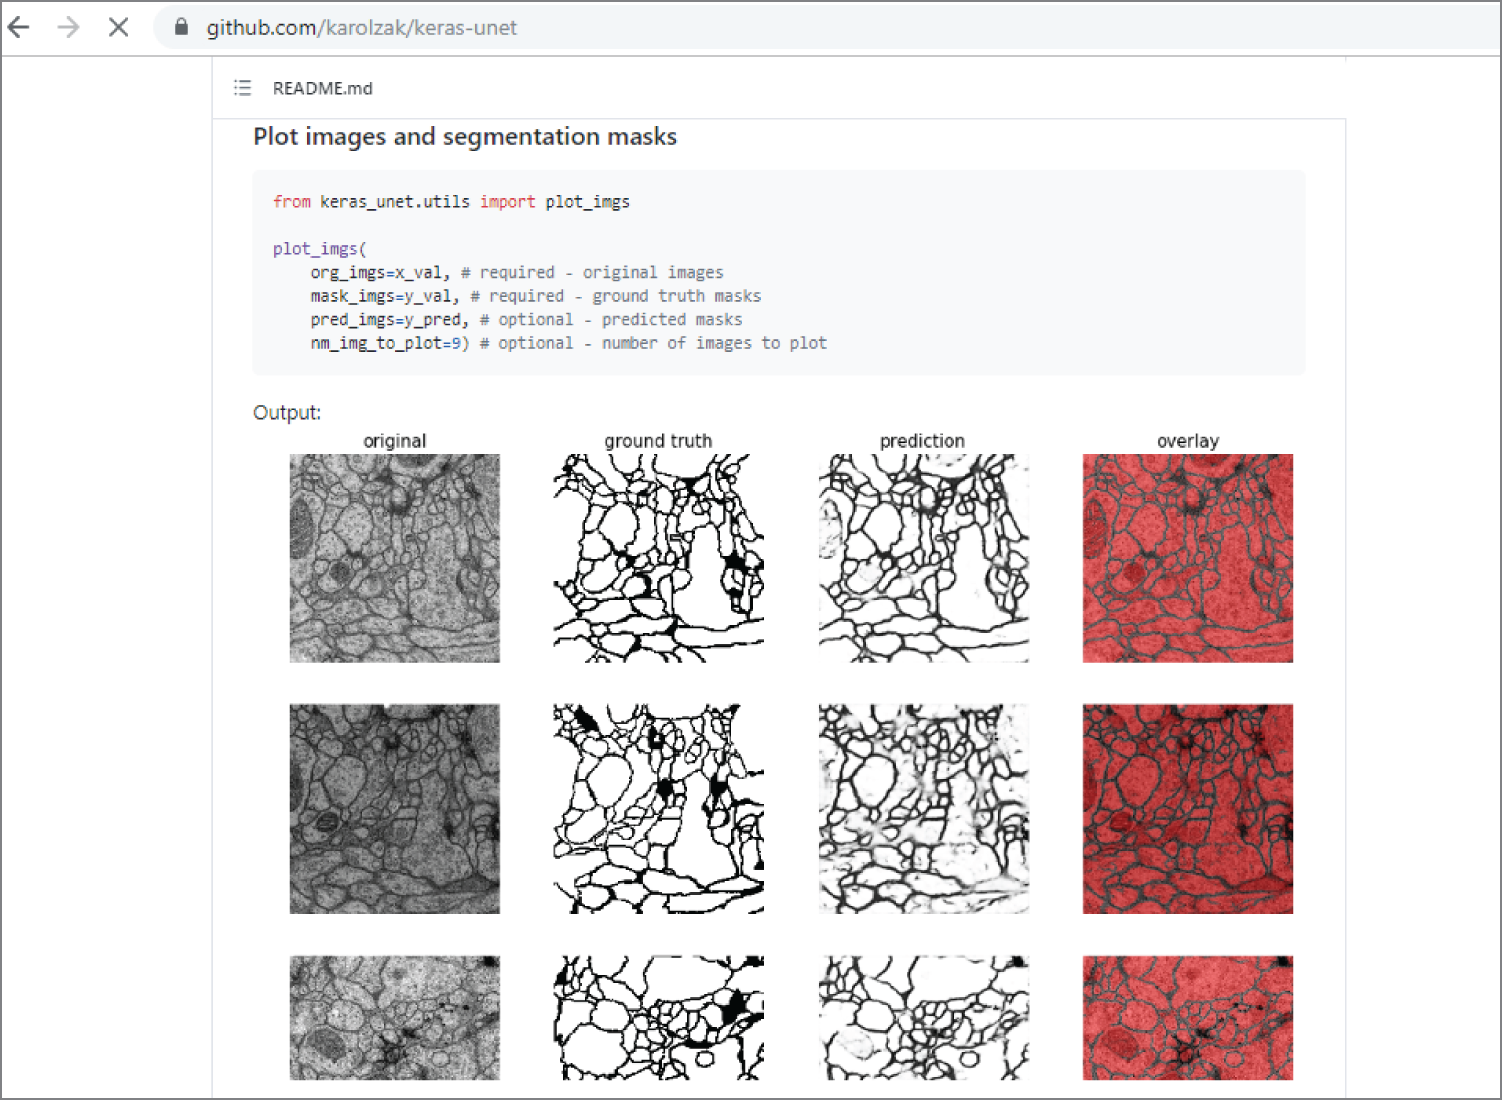 Snapshot of the Keras-Unet library GitHub website with serial section Transmission Electron Microscopy images.